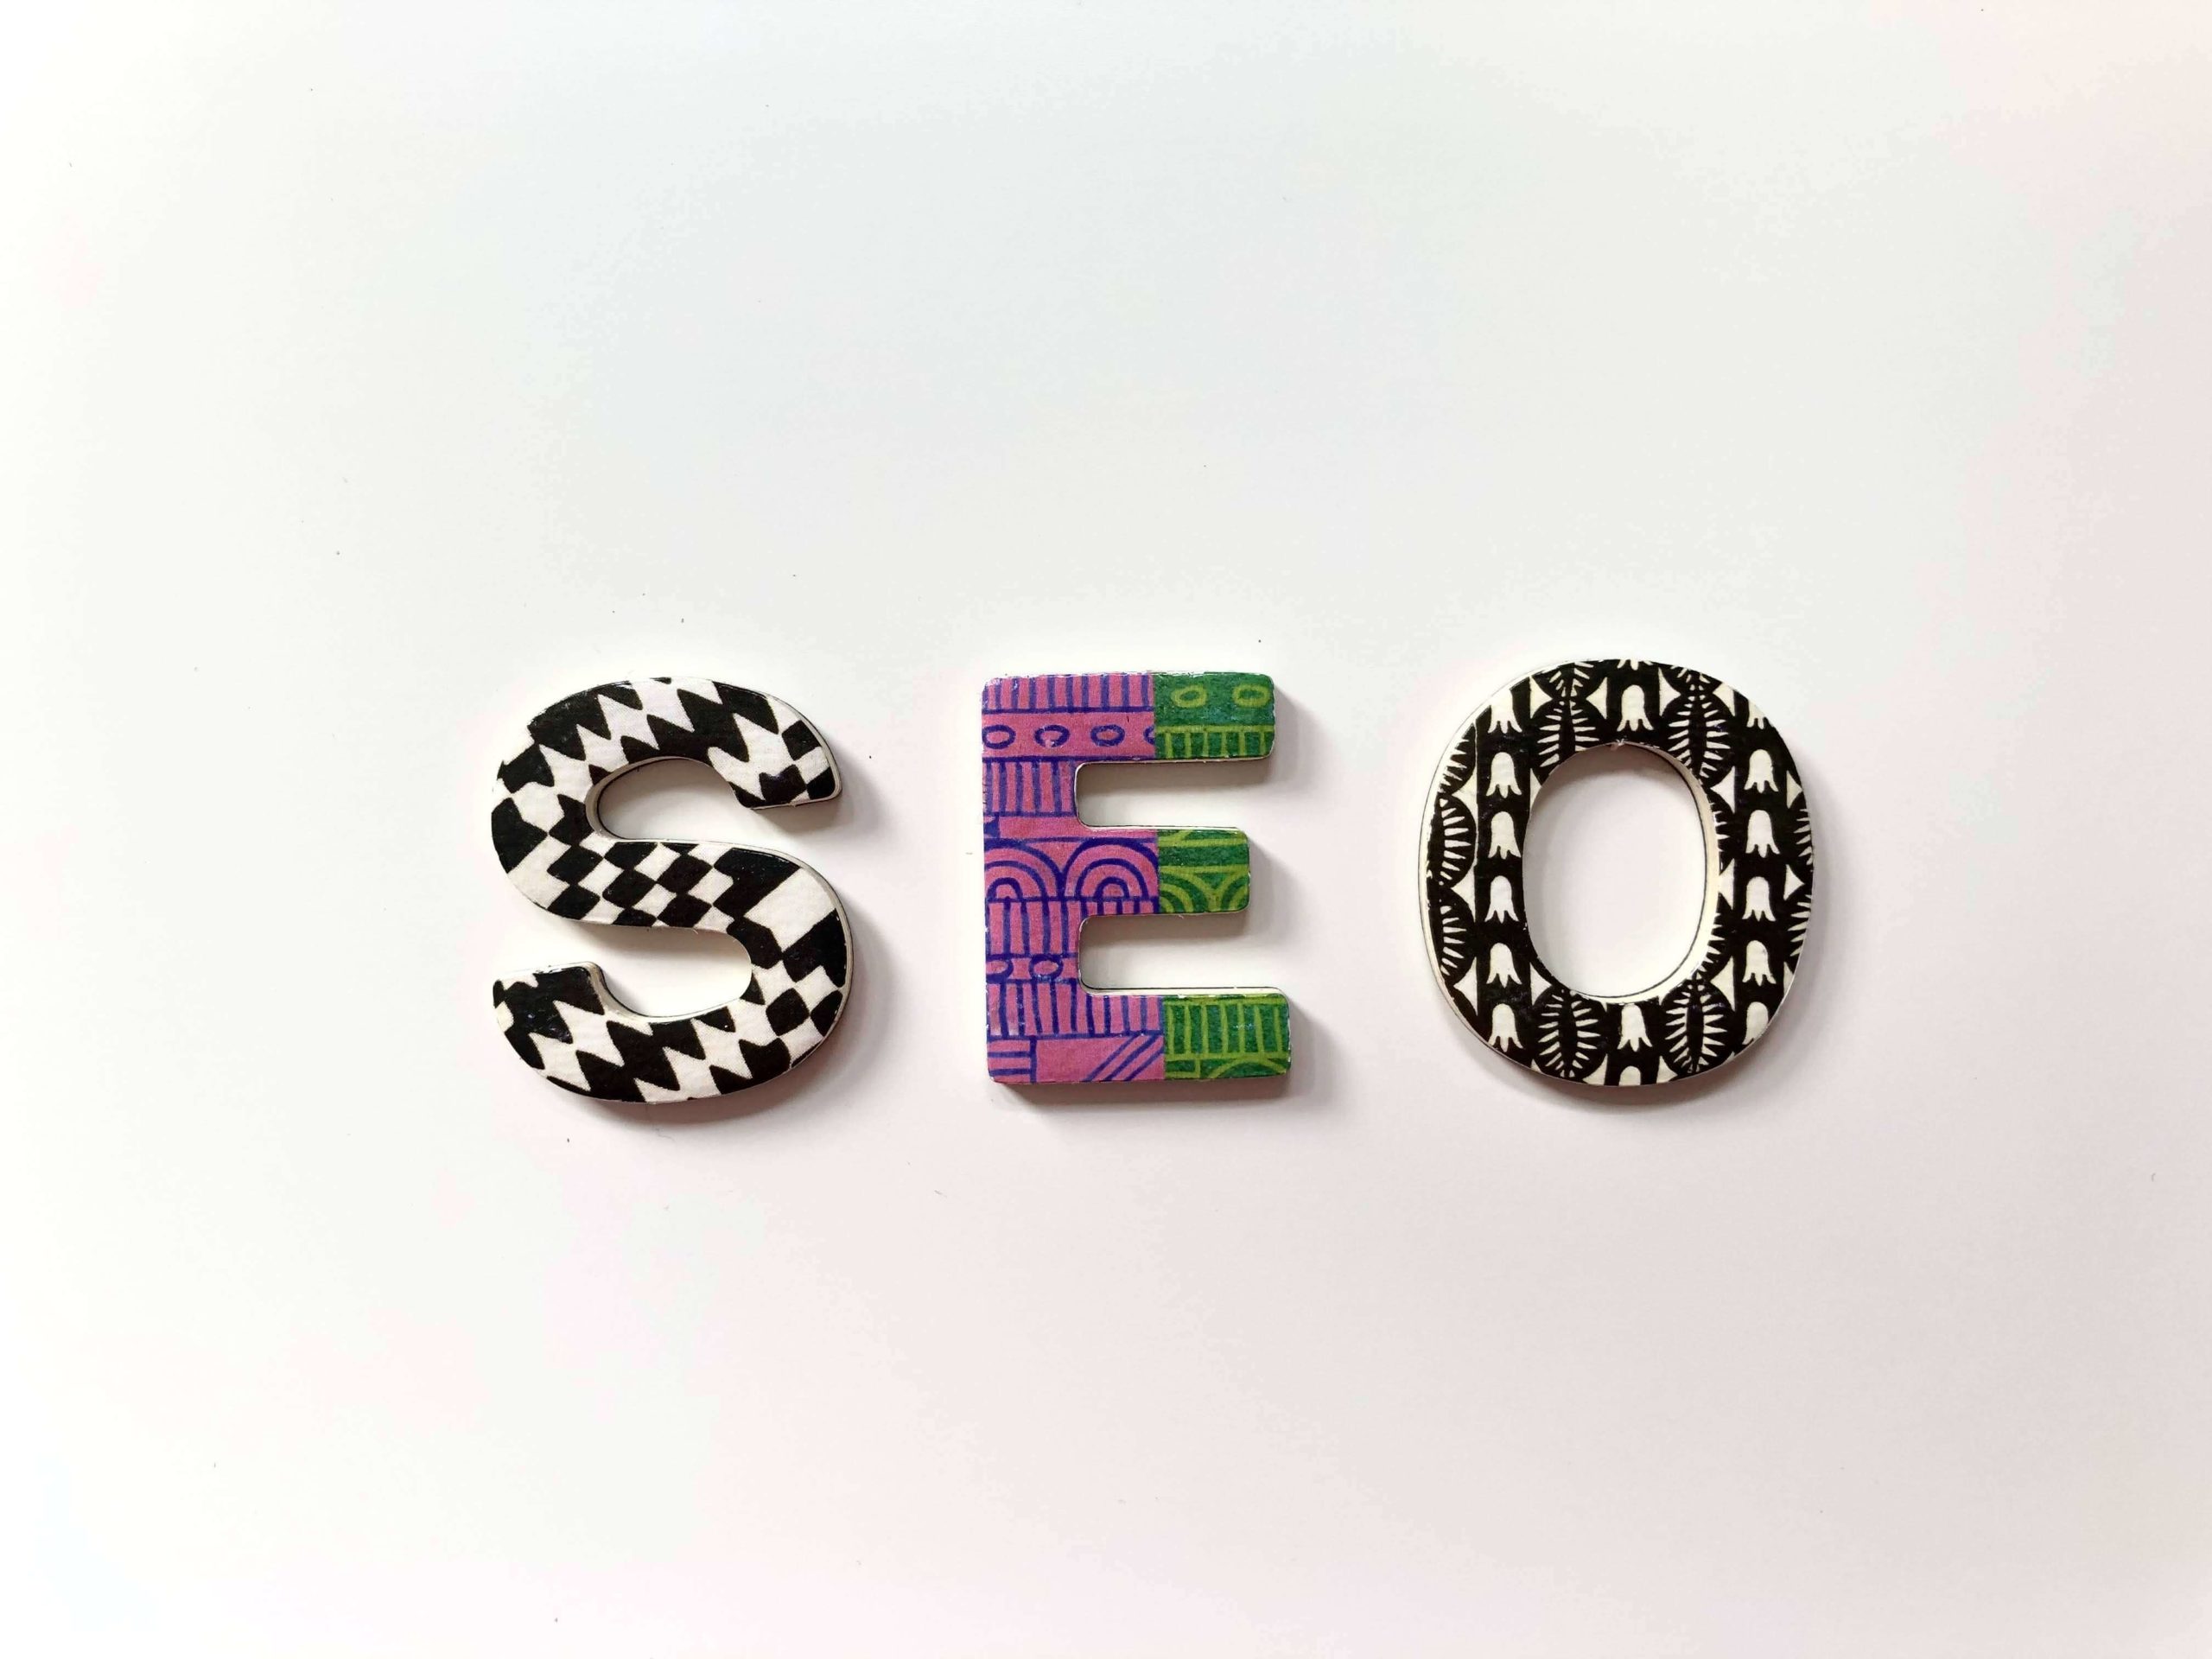 SEO displayed in colorful letters